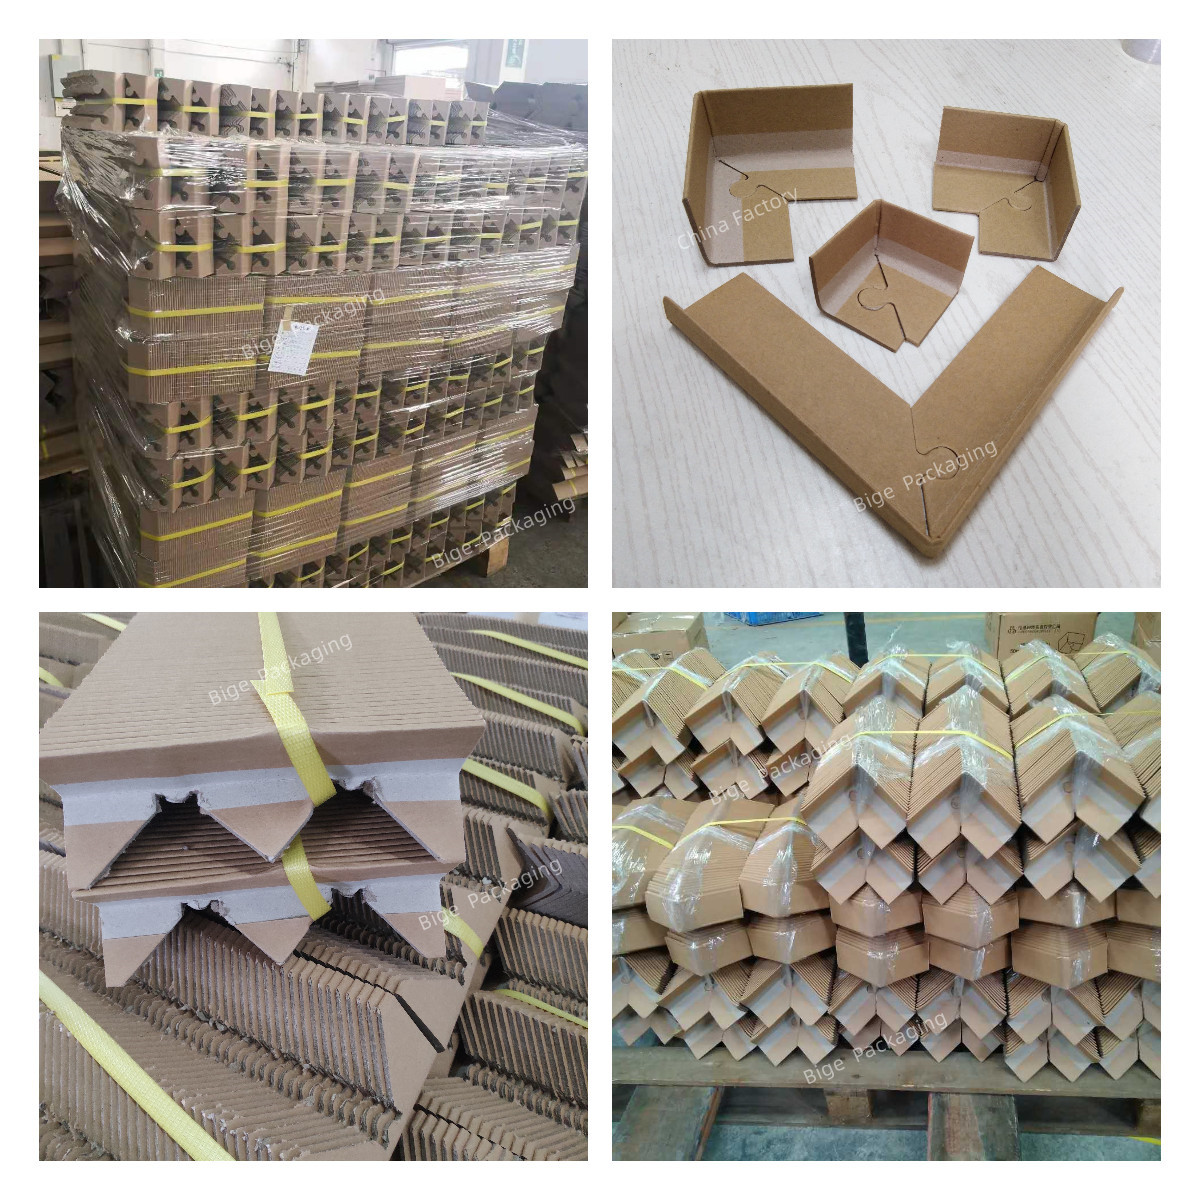 Paper Edge Protector for Pallet/ Product/ Carton Corner Edge Protection -  China Edge Protector, Edgeboard